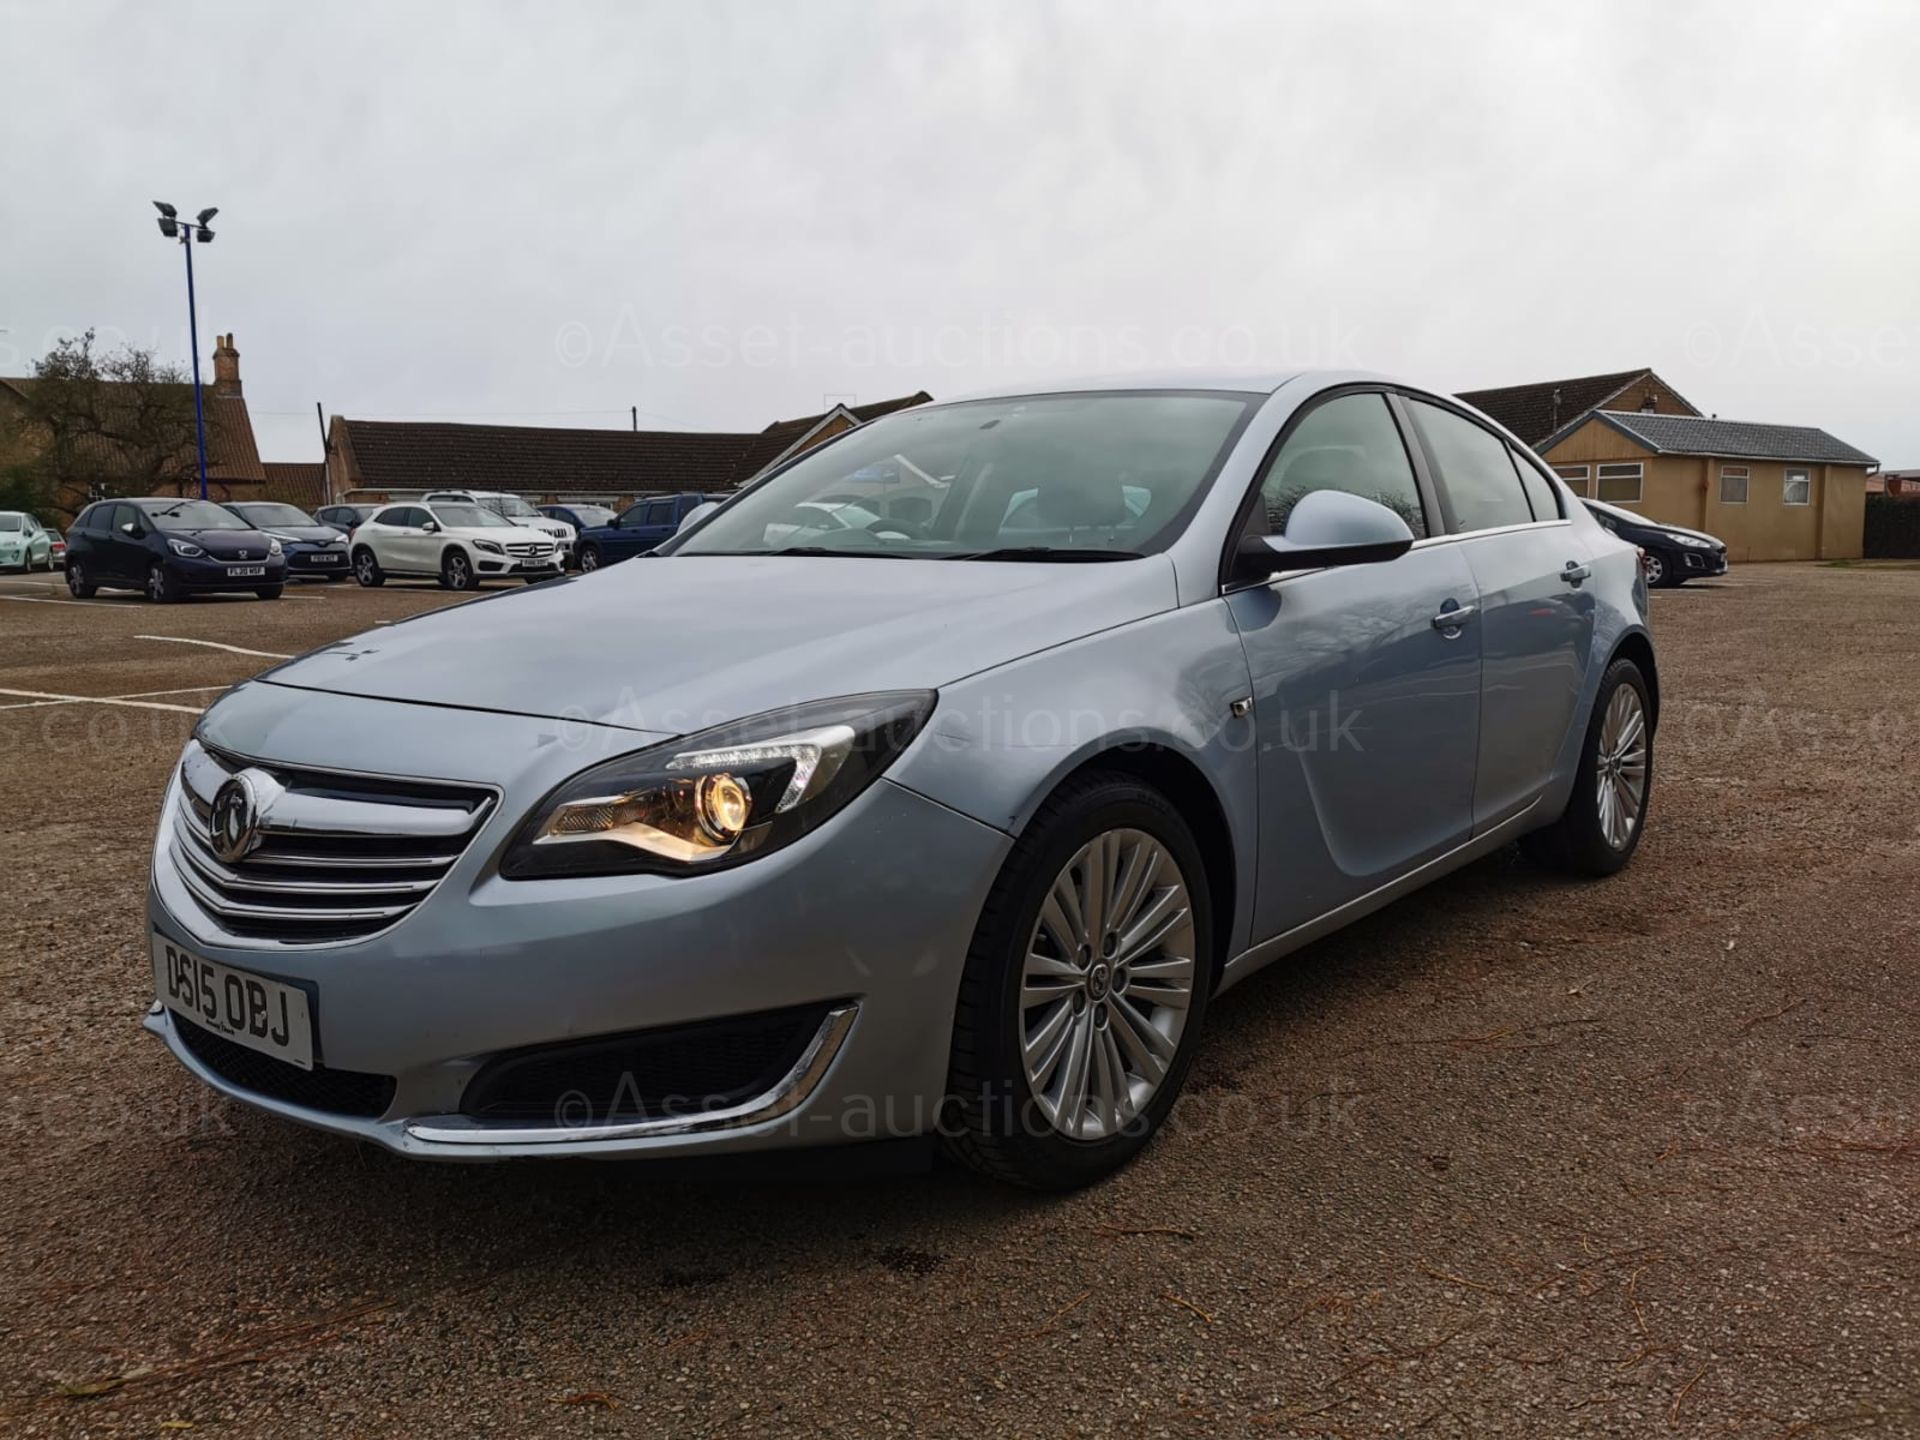 2015 VAUXHALL INSIGNIA DSIGN NAV CDTI ECO SS SILVER HATCHBACK, 83,799 MILES *NO VAT* - Image 3 of 27